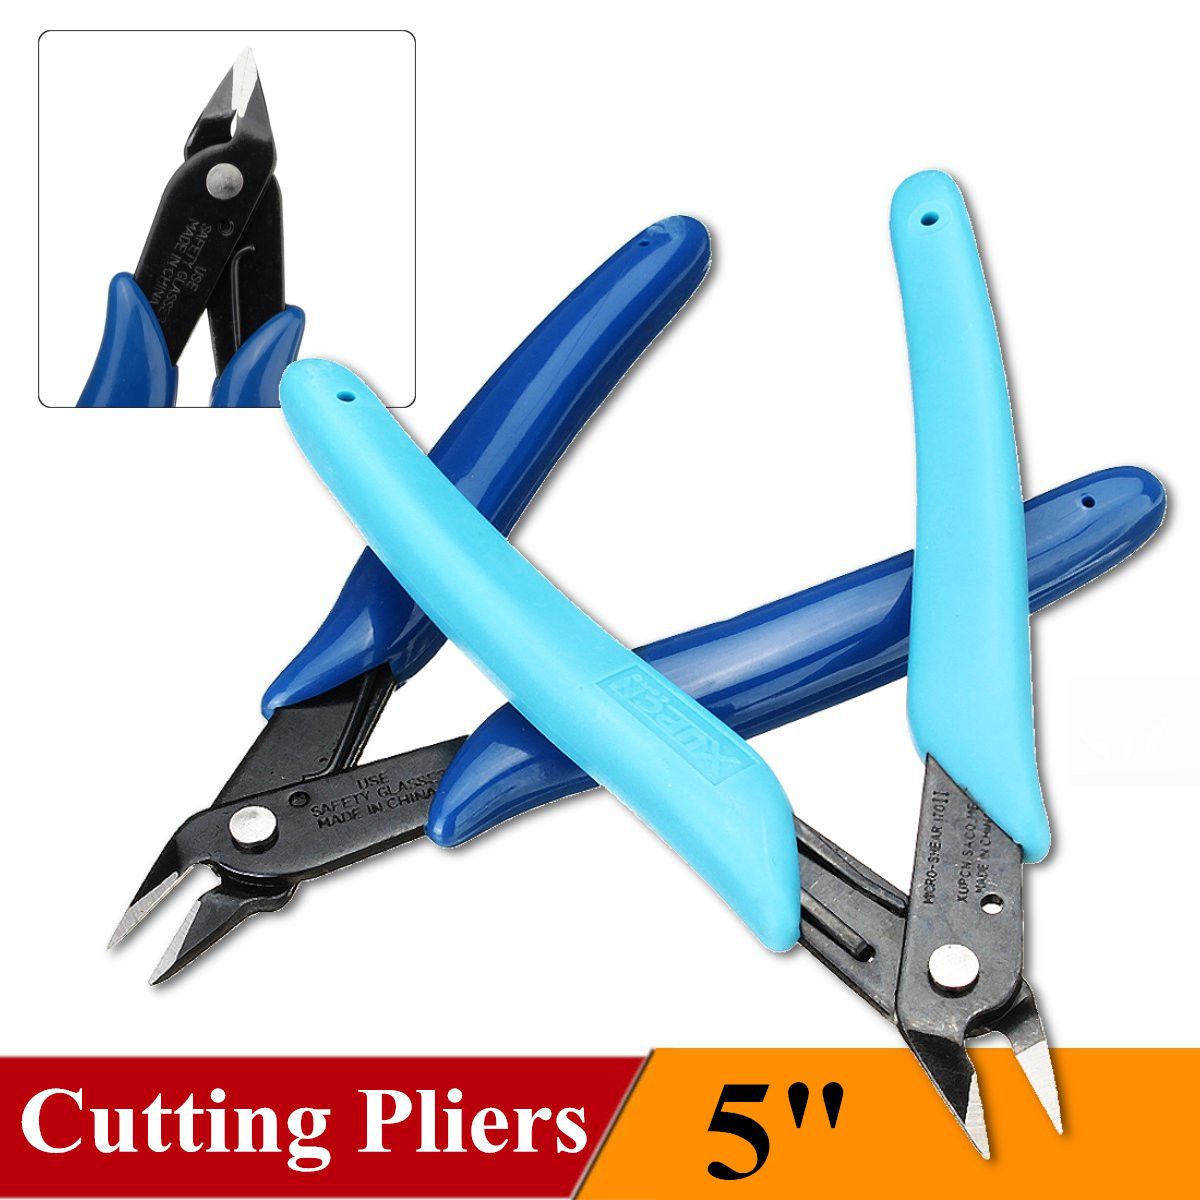 Pliers-Nipper-H-Practical-Electrical-Wire-Cable-Cutter-Cutting-Side-Snips-Flush-Pliers-Mini-Pliers-1371806